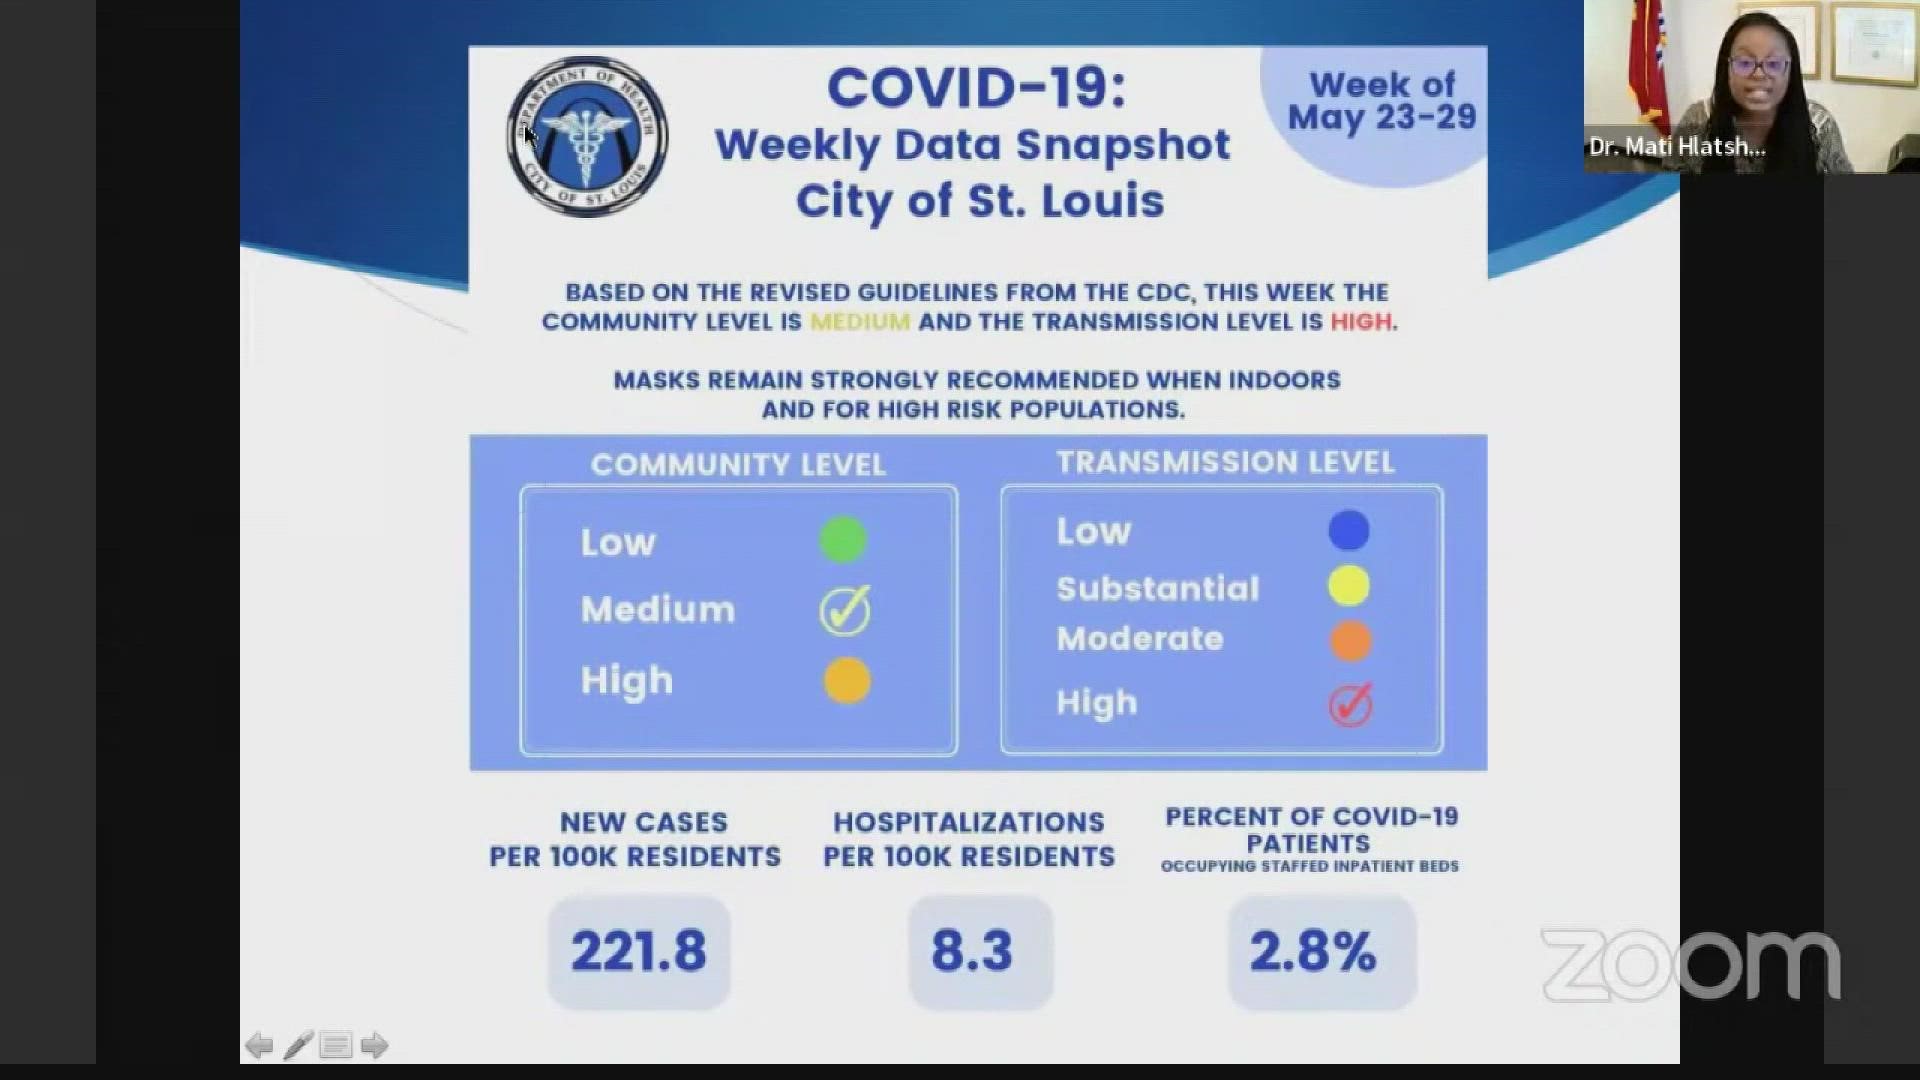 St. Louis' Director of Health is urging citizens to wear masks indoors and to get vaccinated against the COVID-19 virus to slow infection rates.